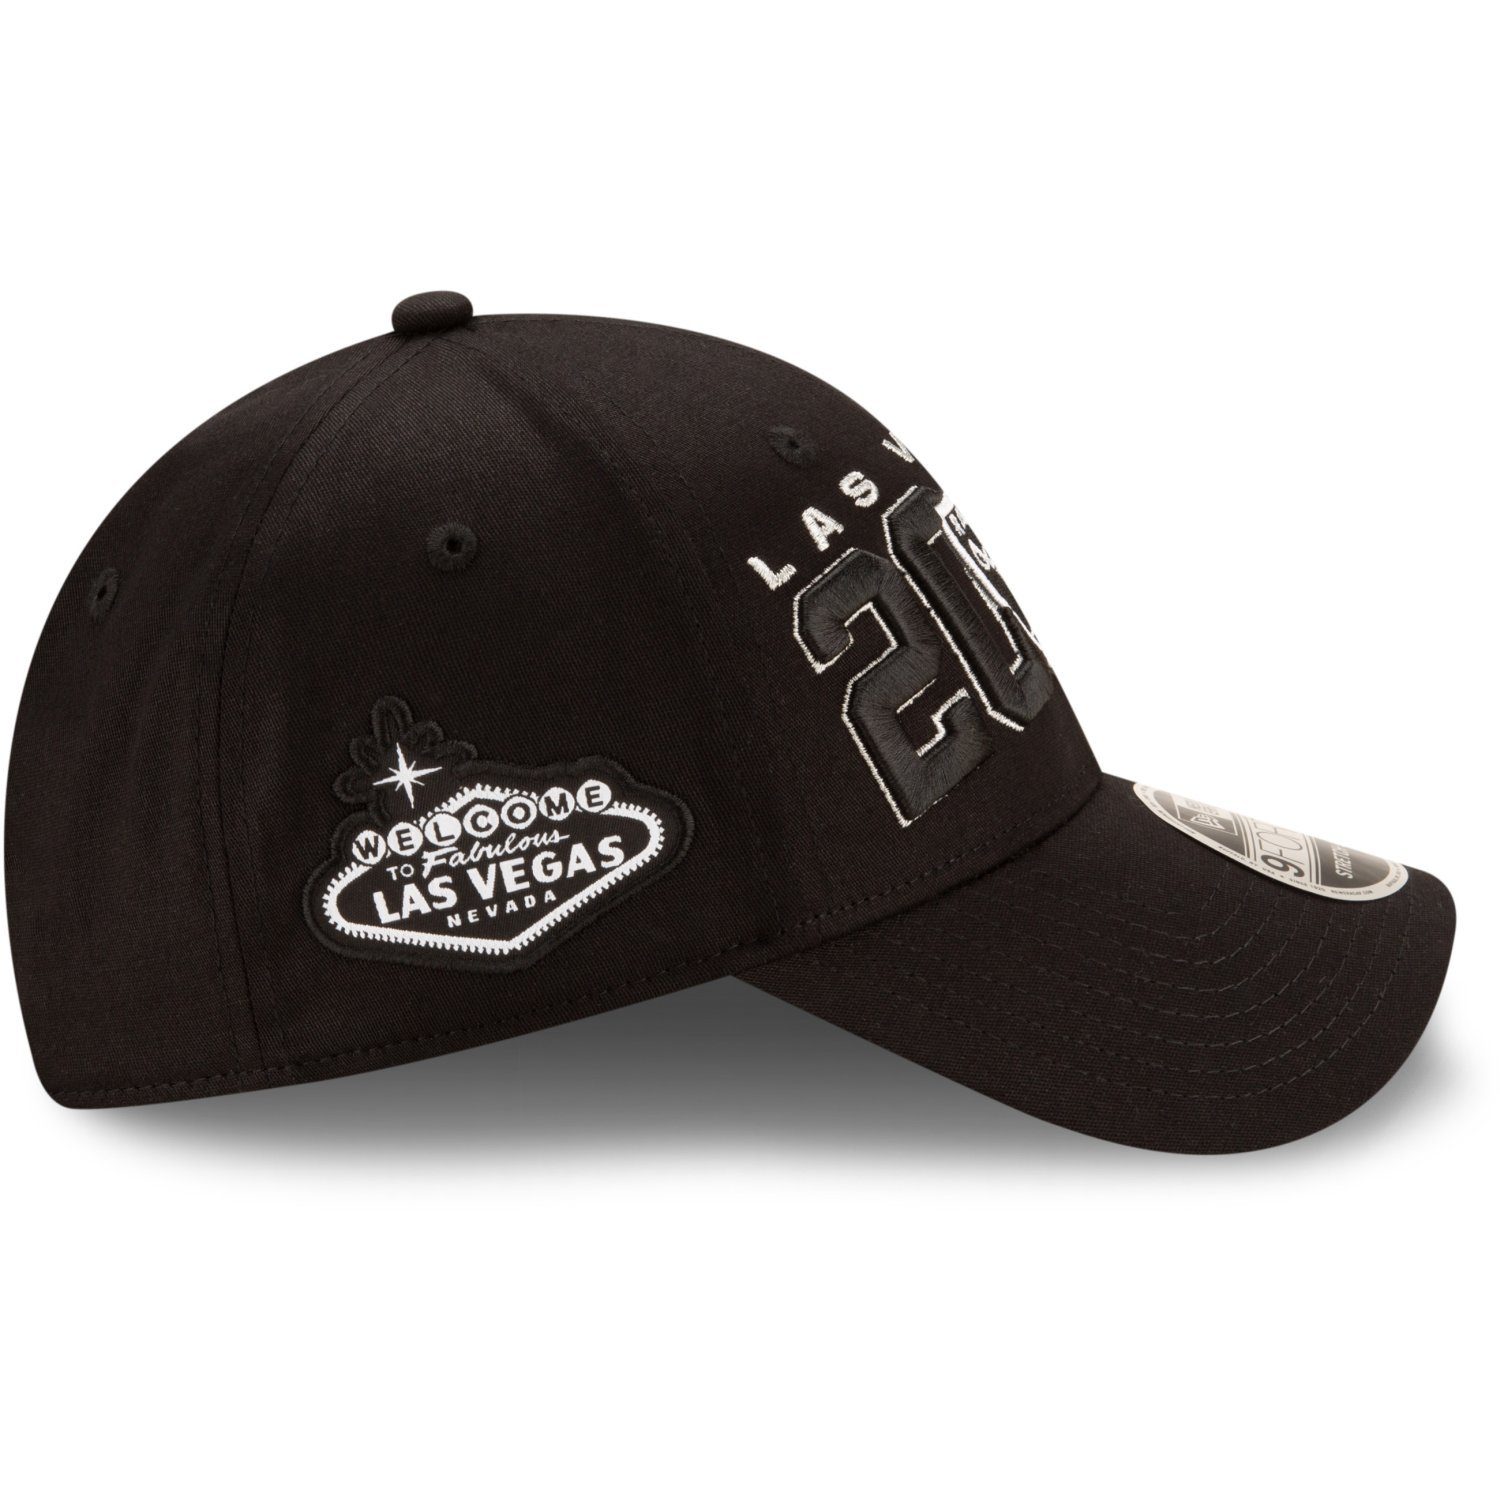 New Era Fitted Cap 9FORTY 2020 DRAFT Stretch Las Vegas Raiders